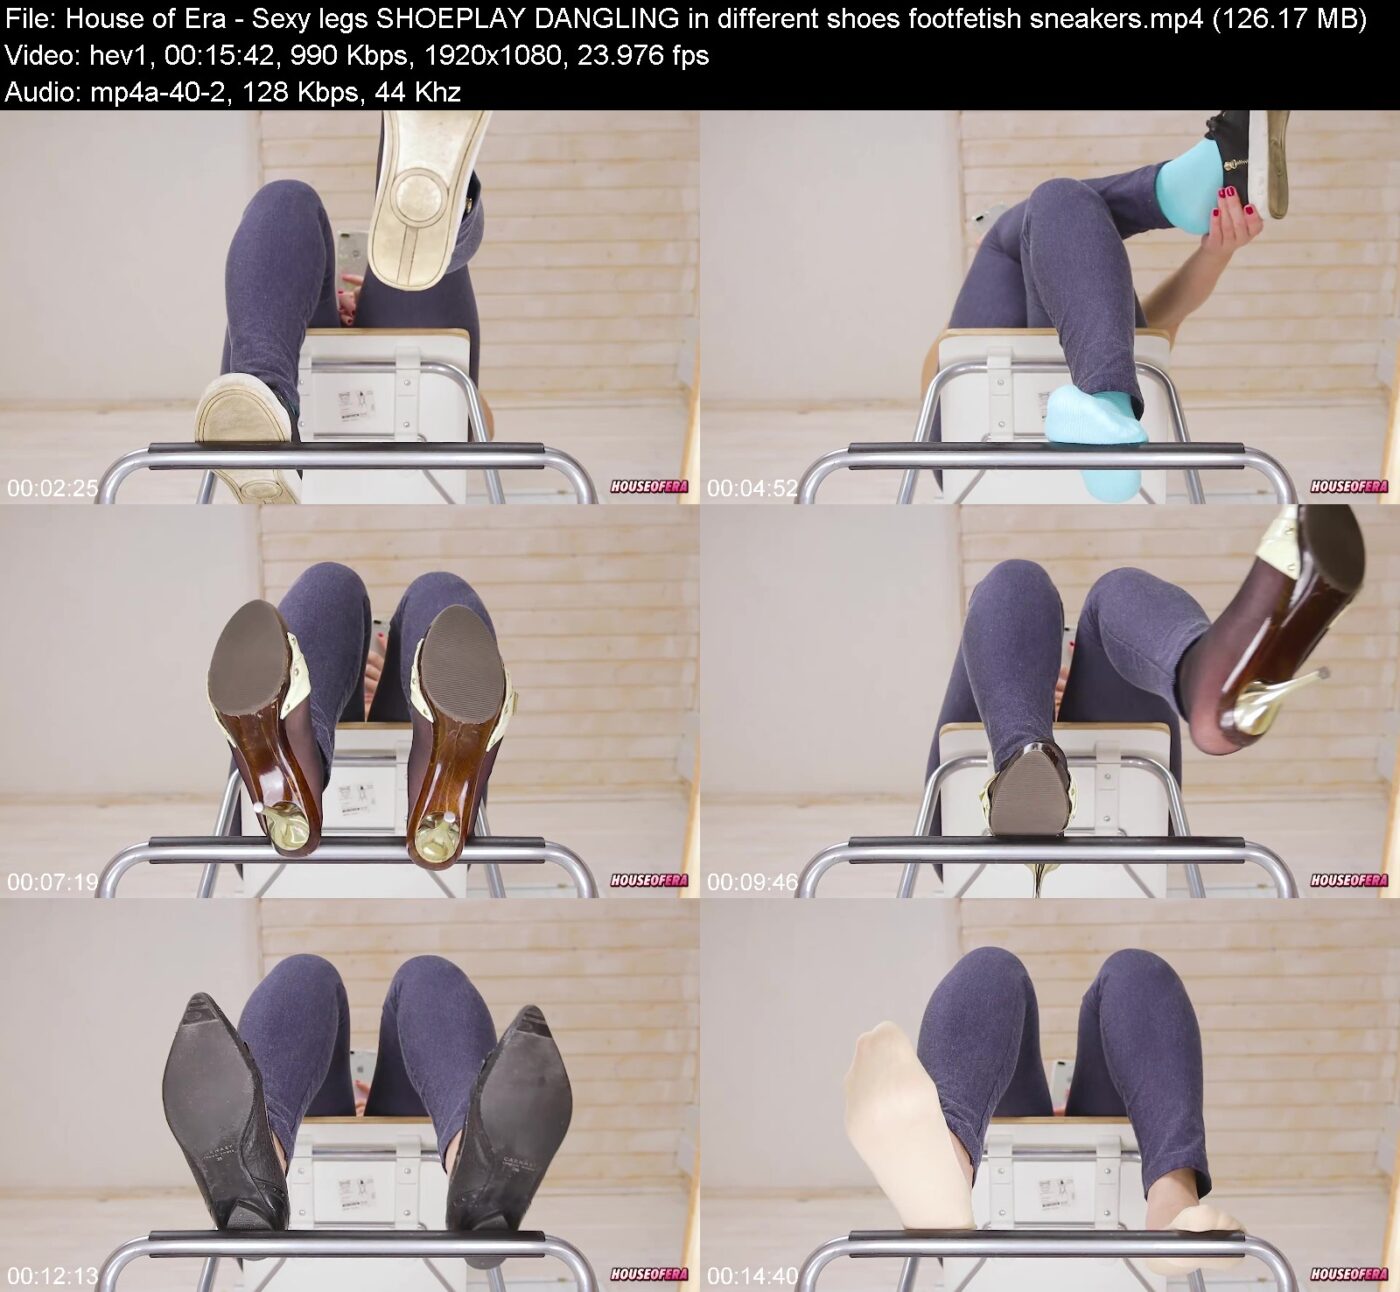 Actress: House of Era. Title and Studio: Sexy legs SHOEPLAY DANGLING in different shoes footfetish sneakers